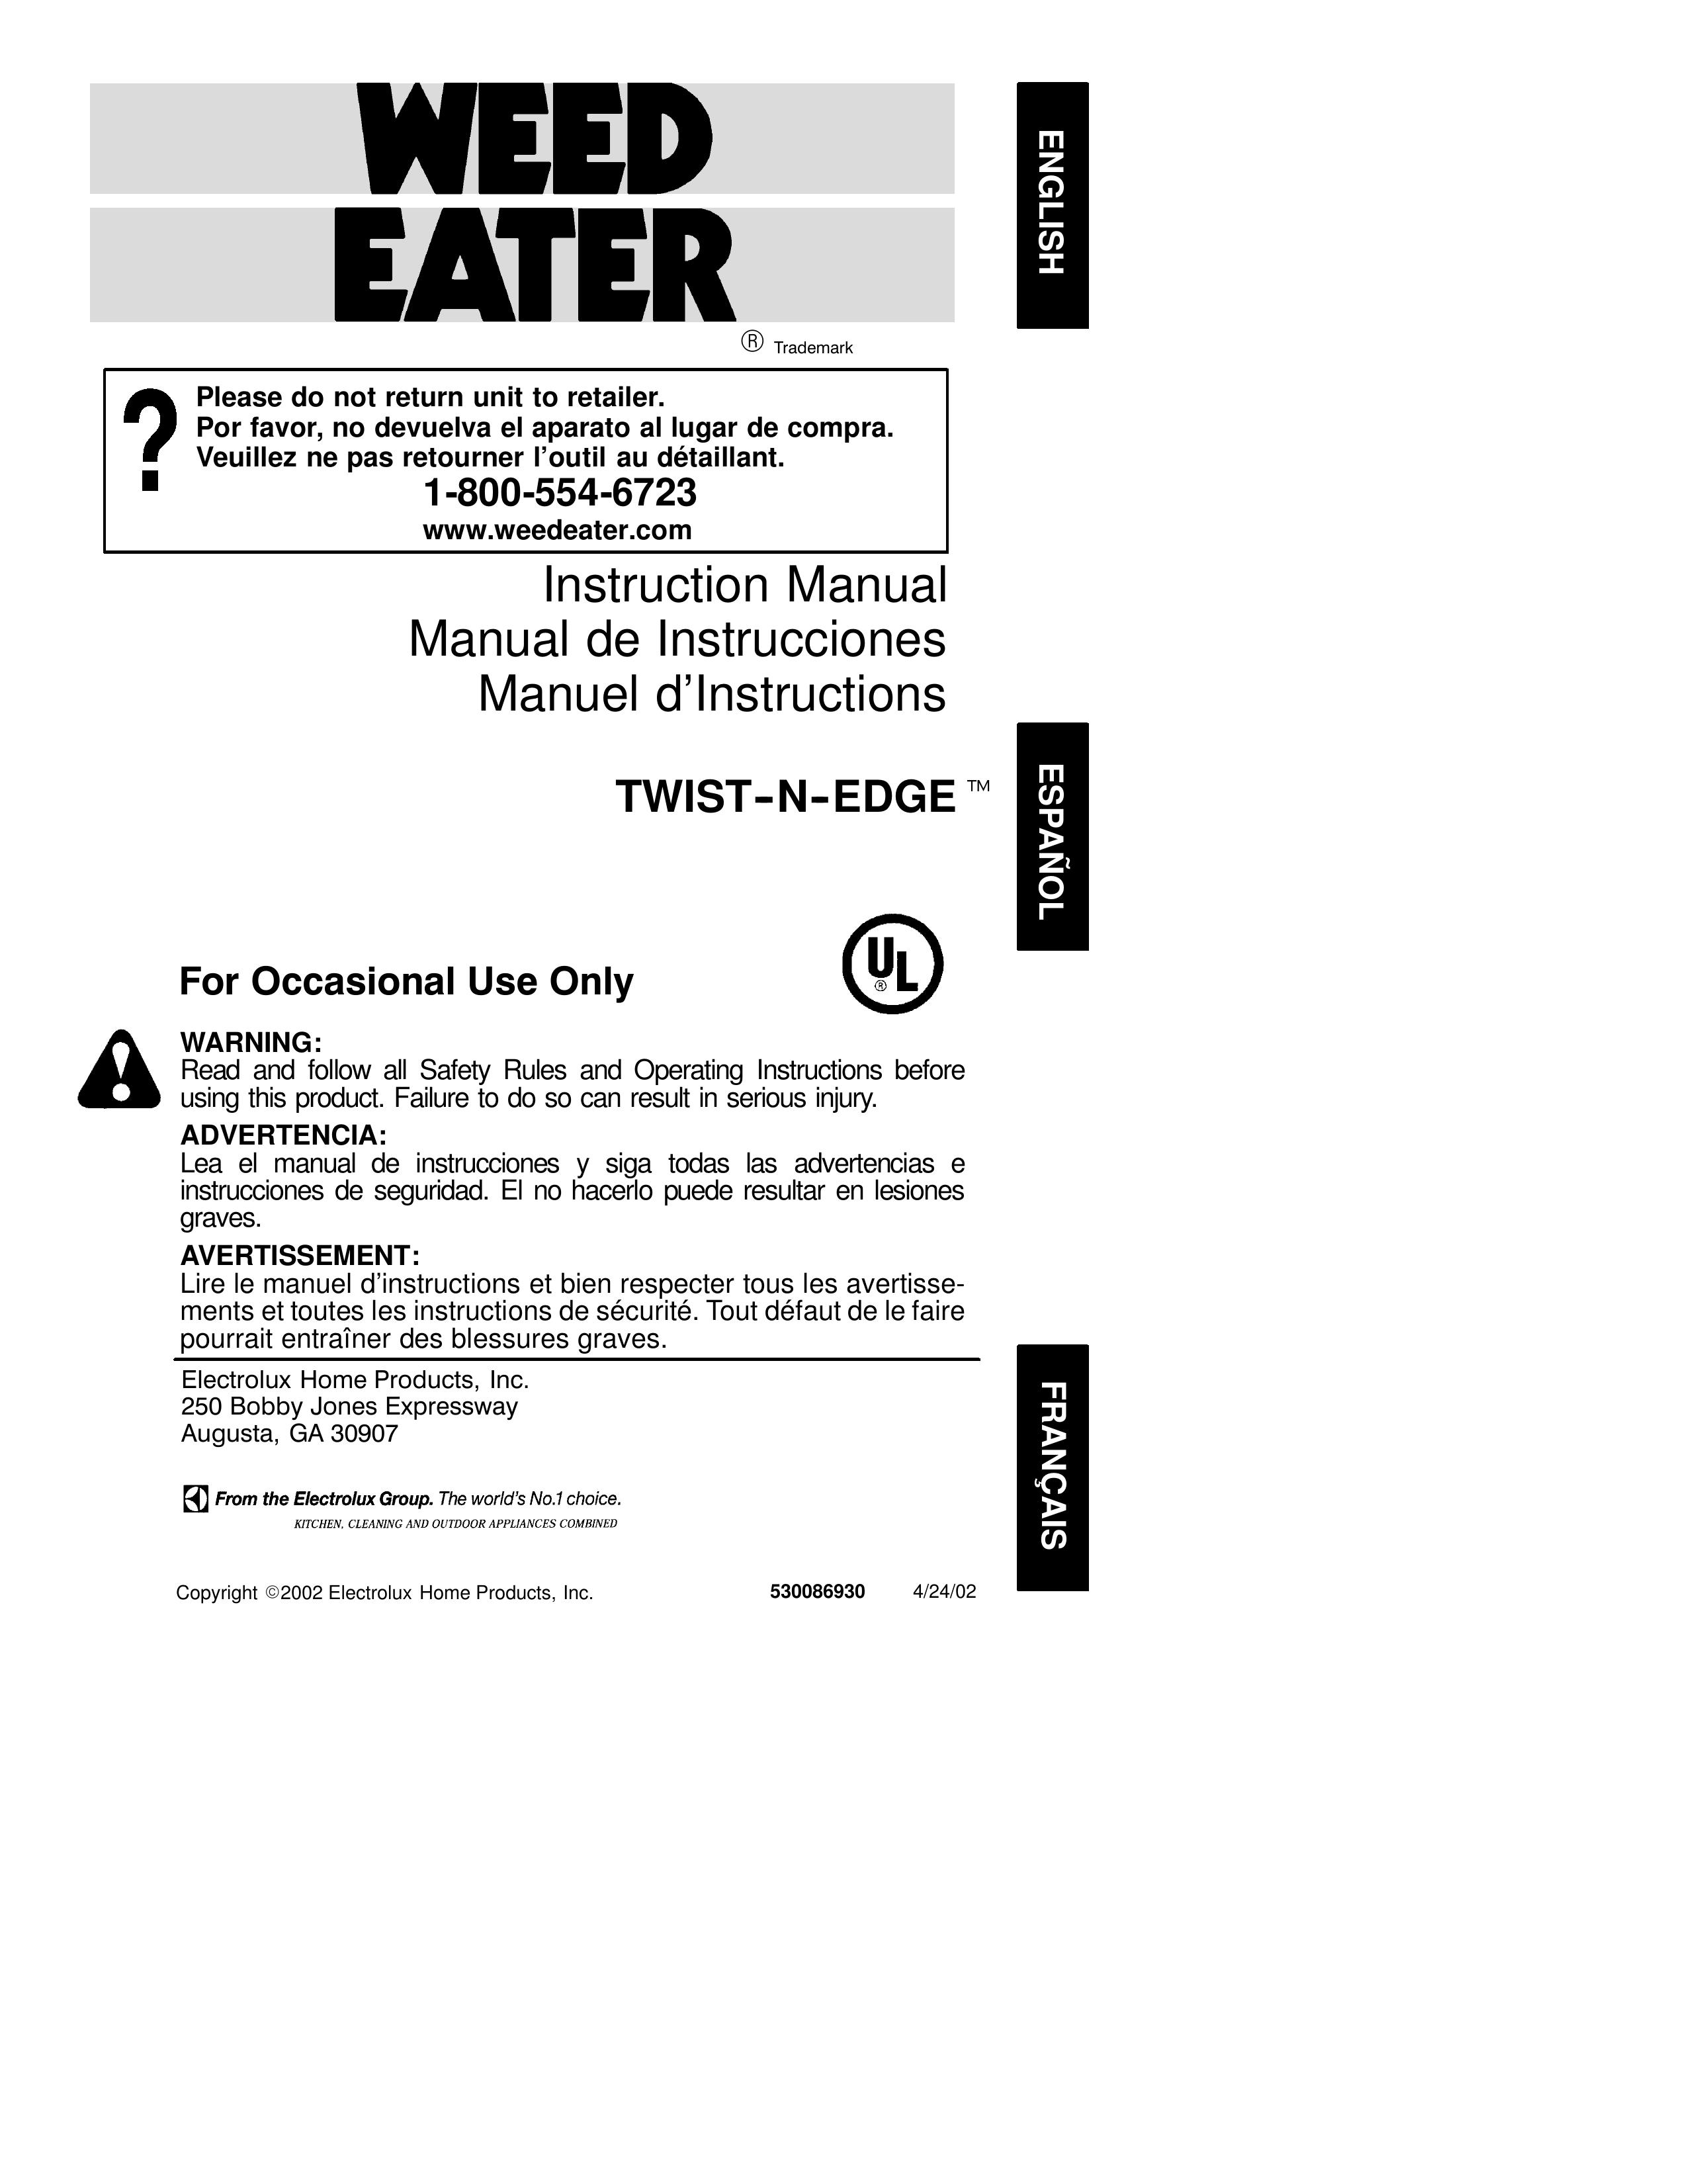 Weed Eater 530086930 Trimmer User Manual